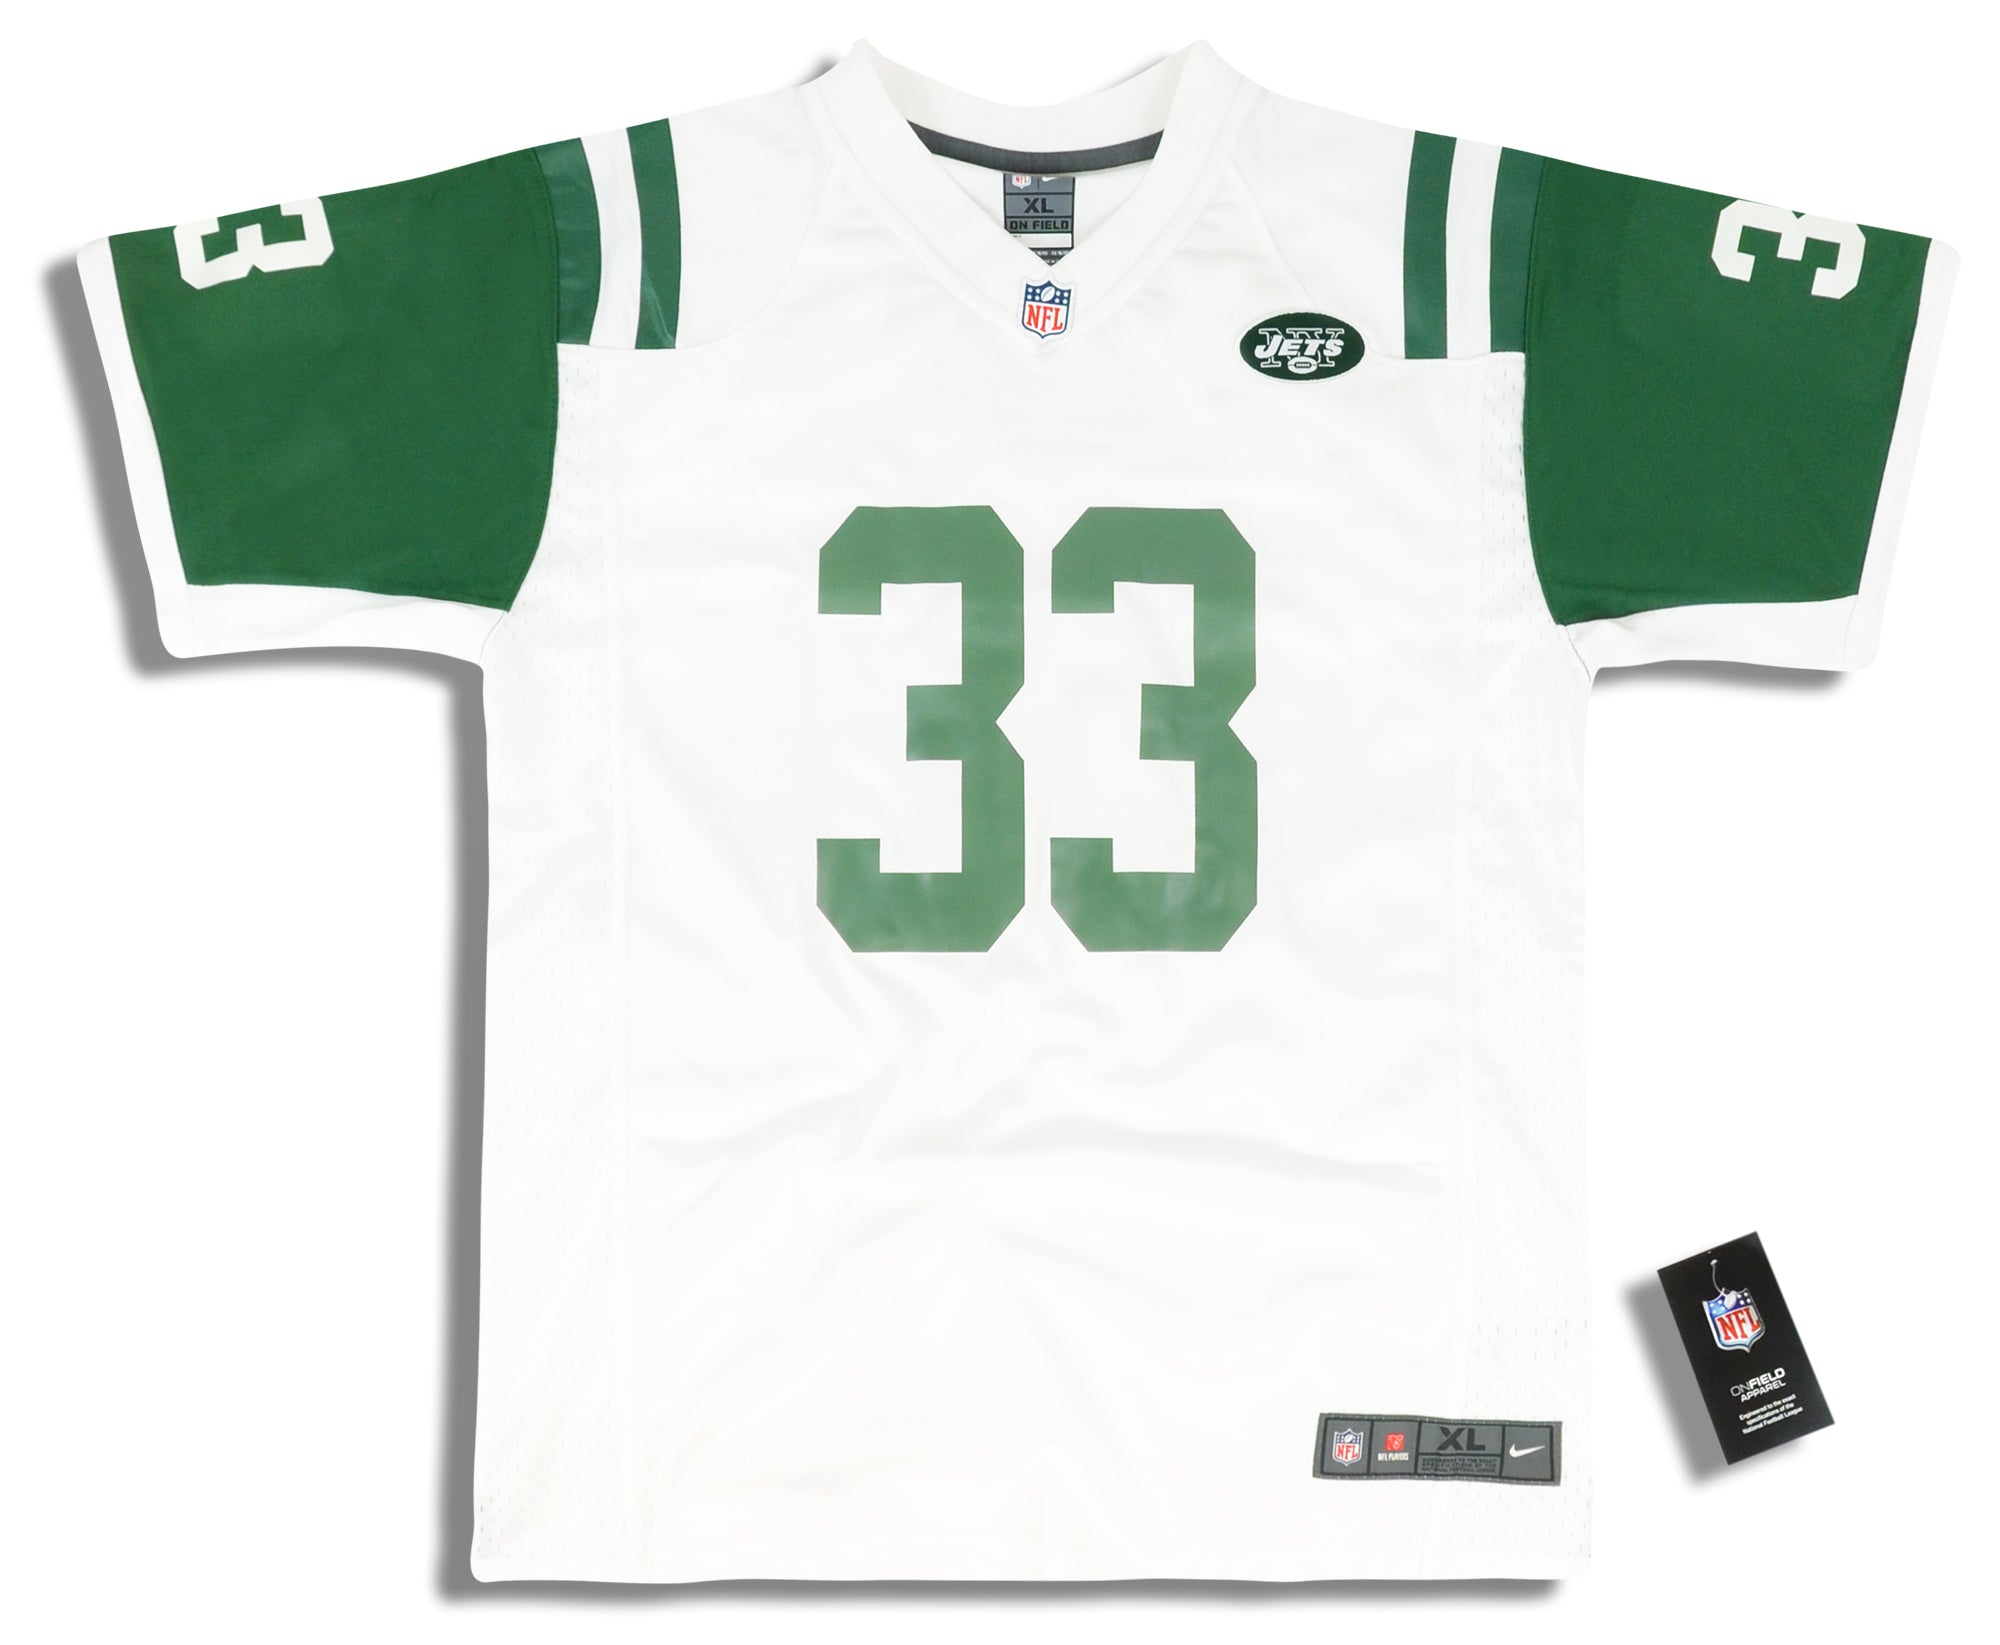 2018 NEW YORK JETS ADAMS #33 NIKE GAME JERSEY (AWAY) Y - W/TAGS